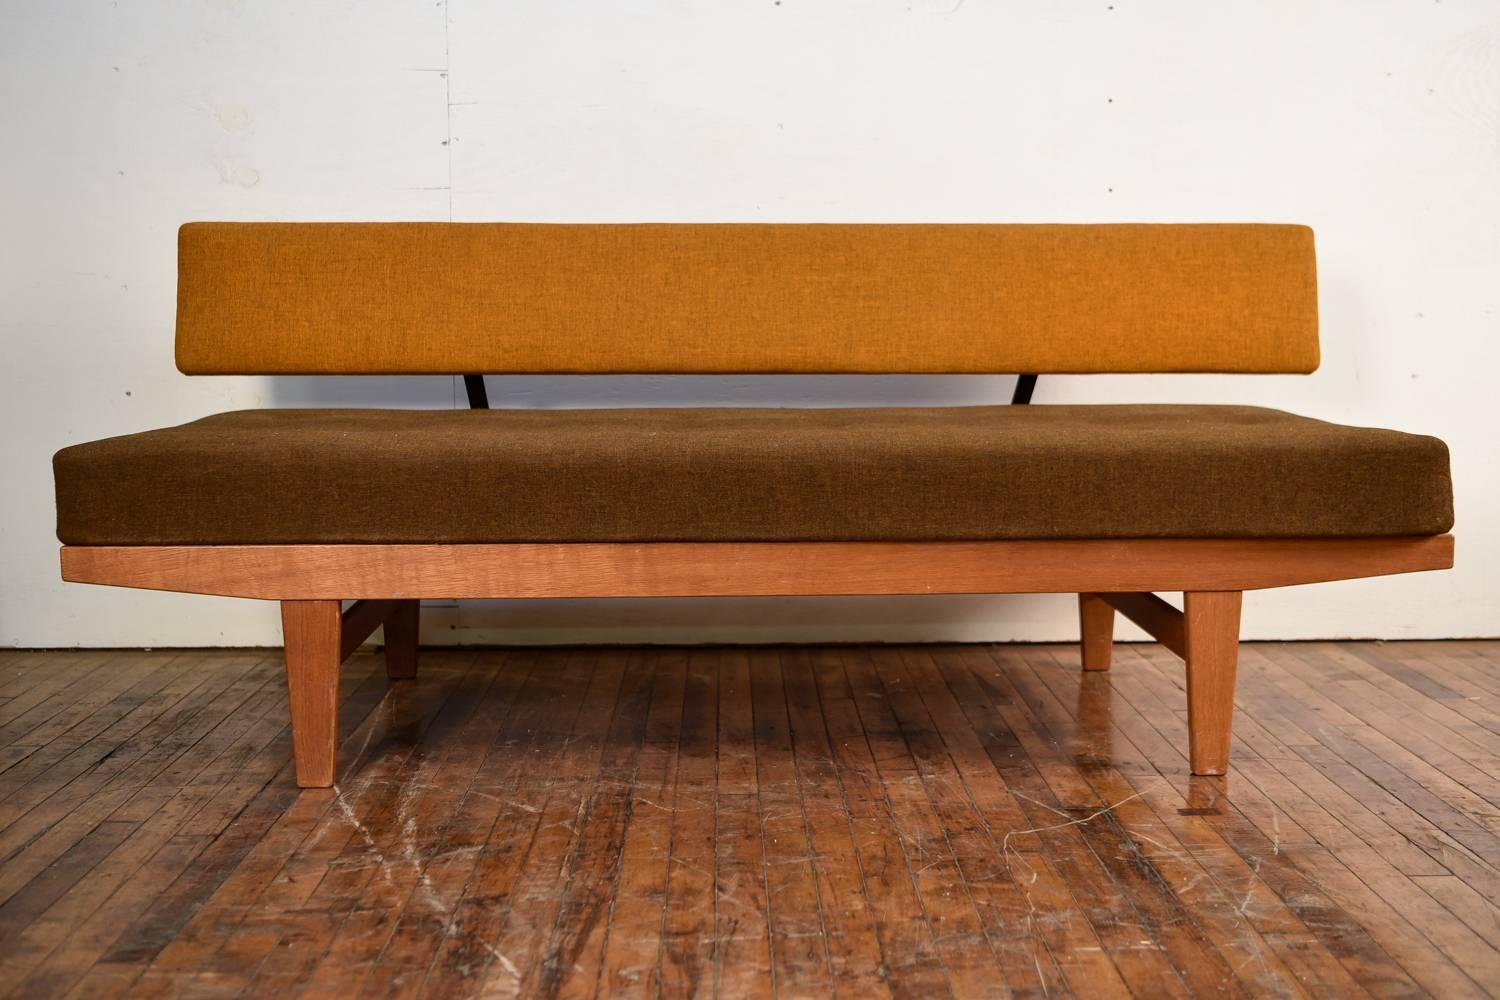 A Danish midcentury teak daybed designed by Poul M. Volther in 1958. Manufactured for FDB by C. M. Madsen, Model H9. Model H9 is notable due to the removable backrest, really allowing it to transform from a sofa to a daybed. The tufted seat is most